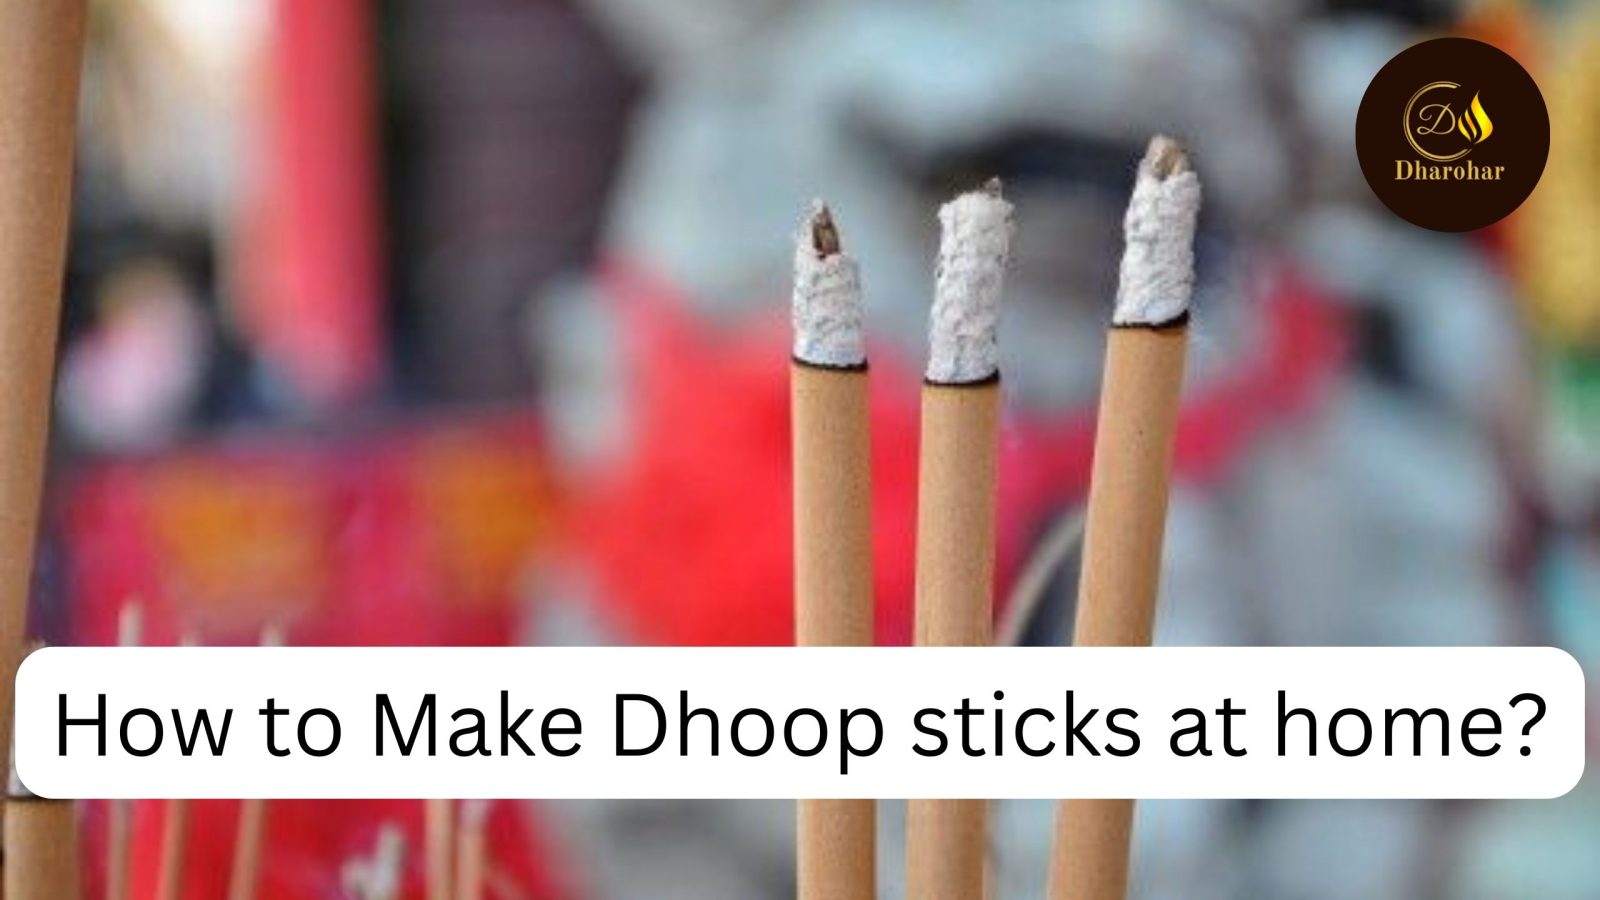 This picture is related to making natural dhoop sticks at home.